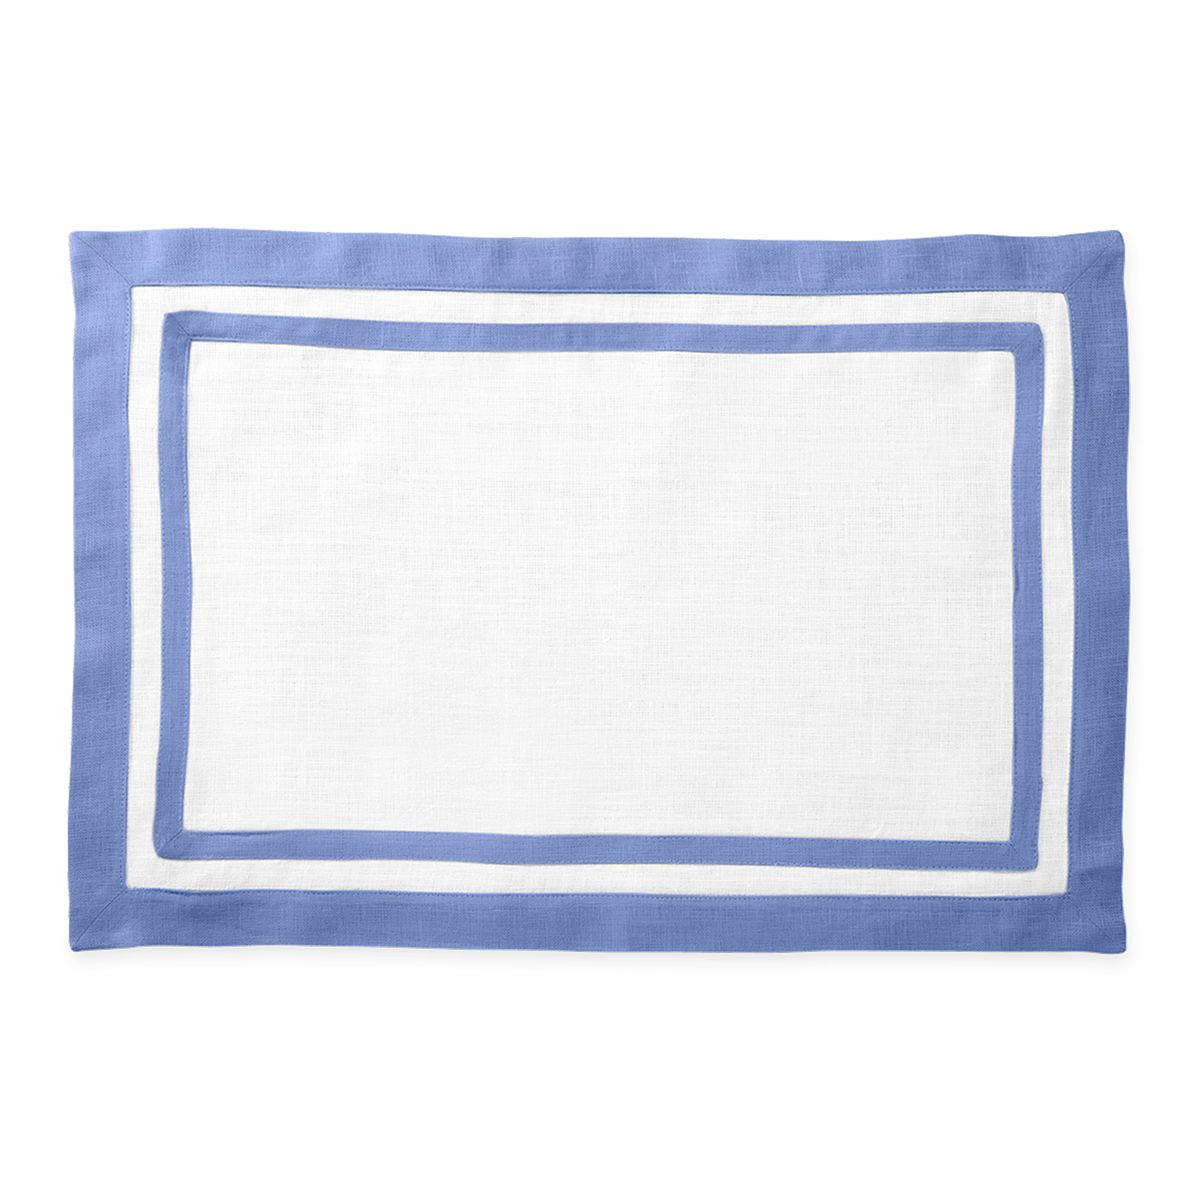 Silo Image of Matouk Double Border Rectangle Placemat in Color Sky Blue